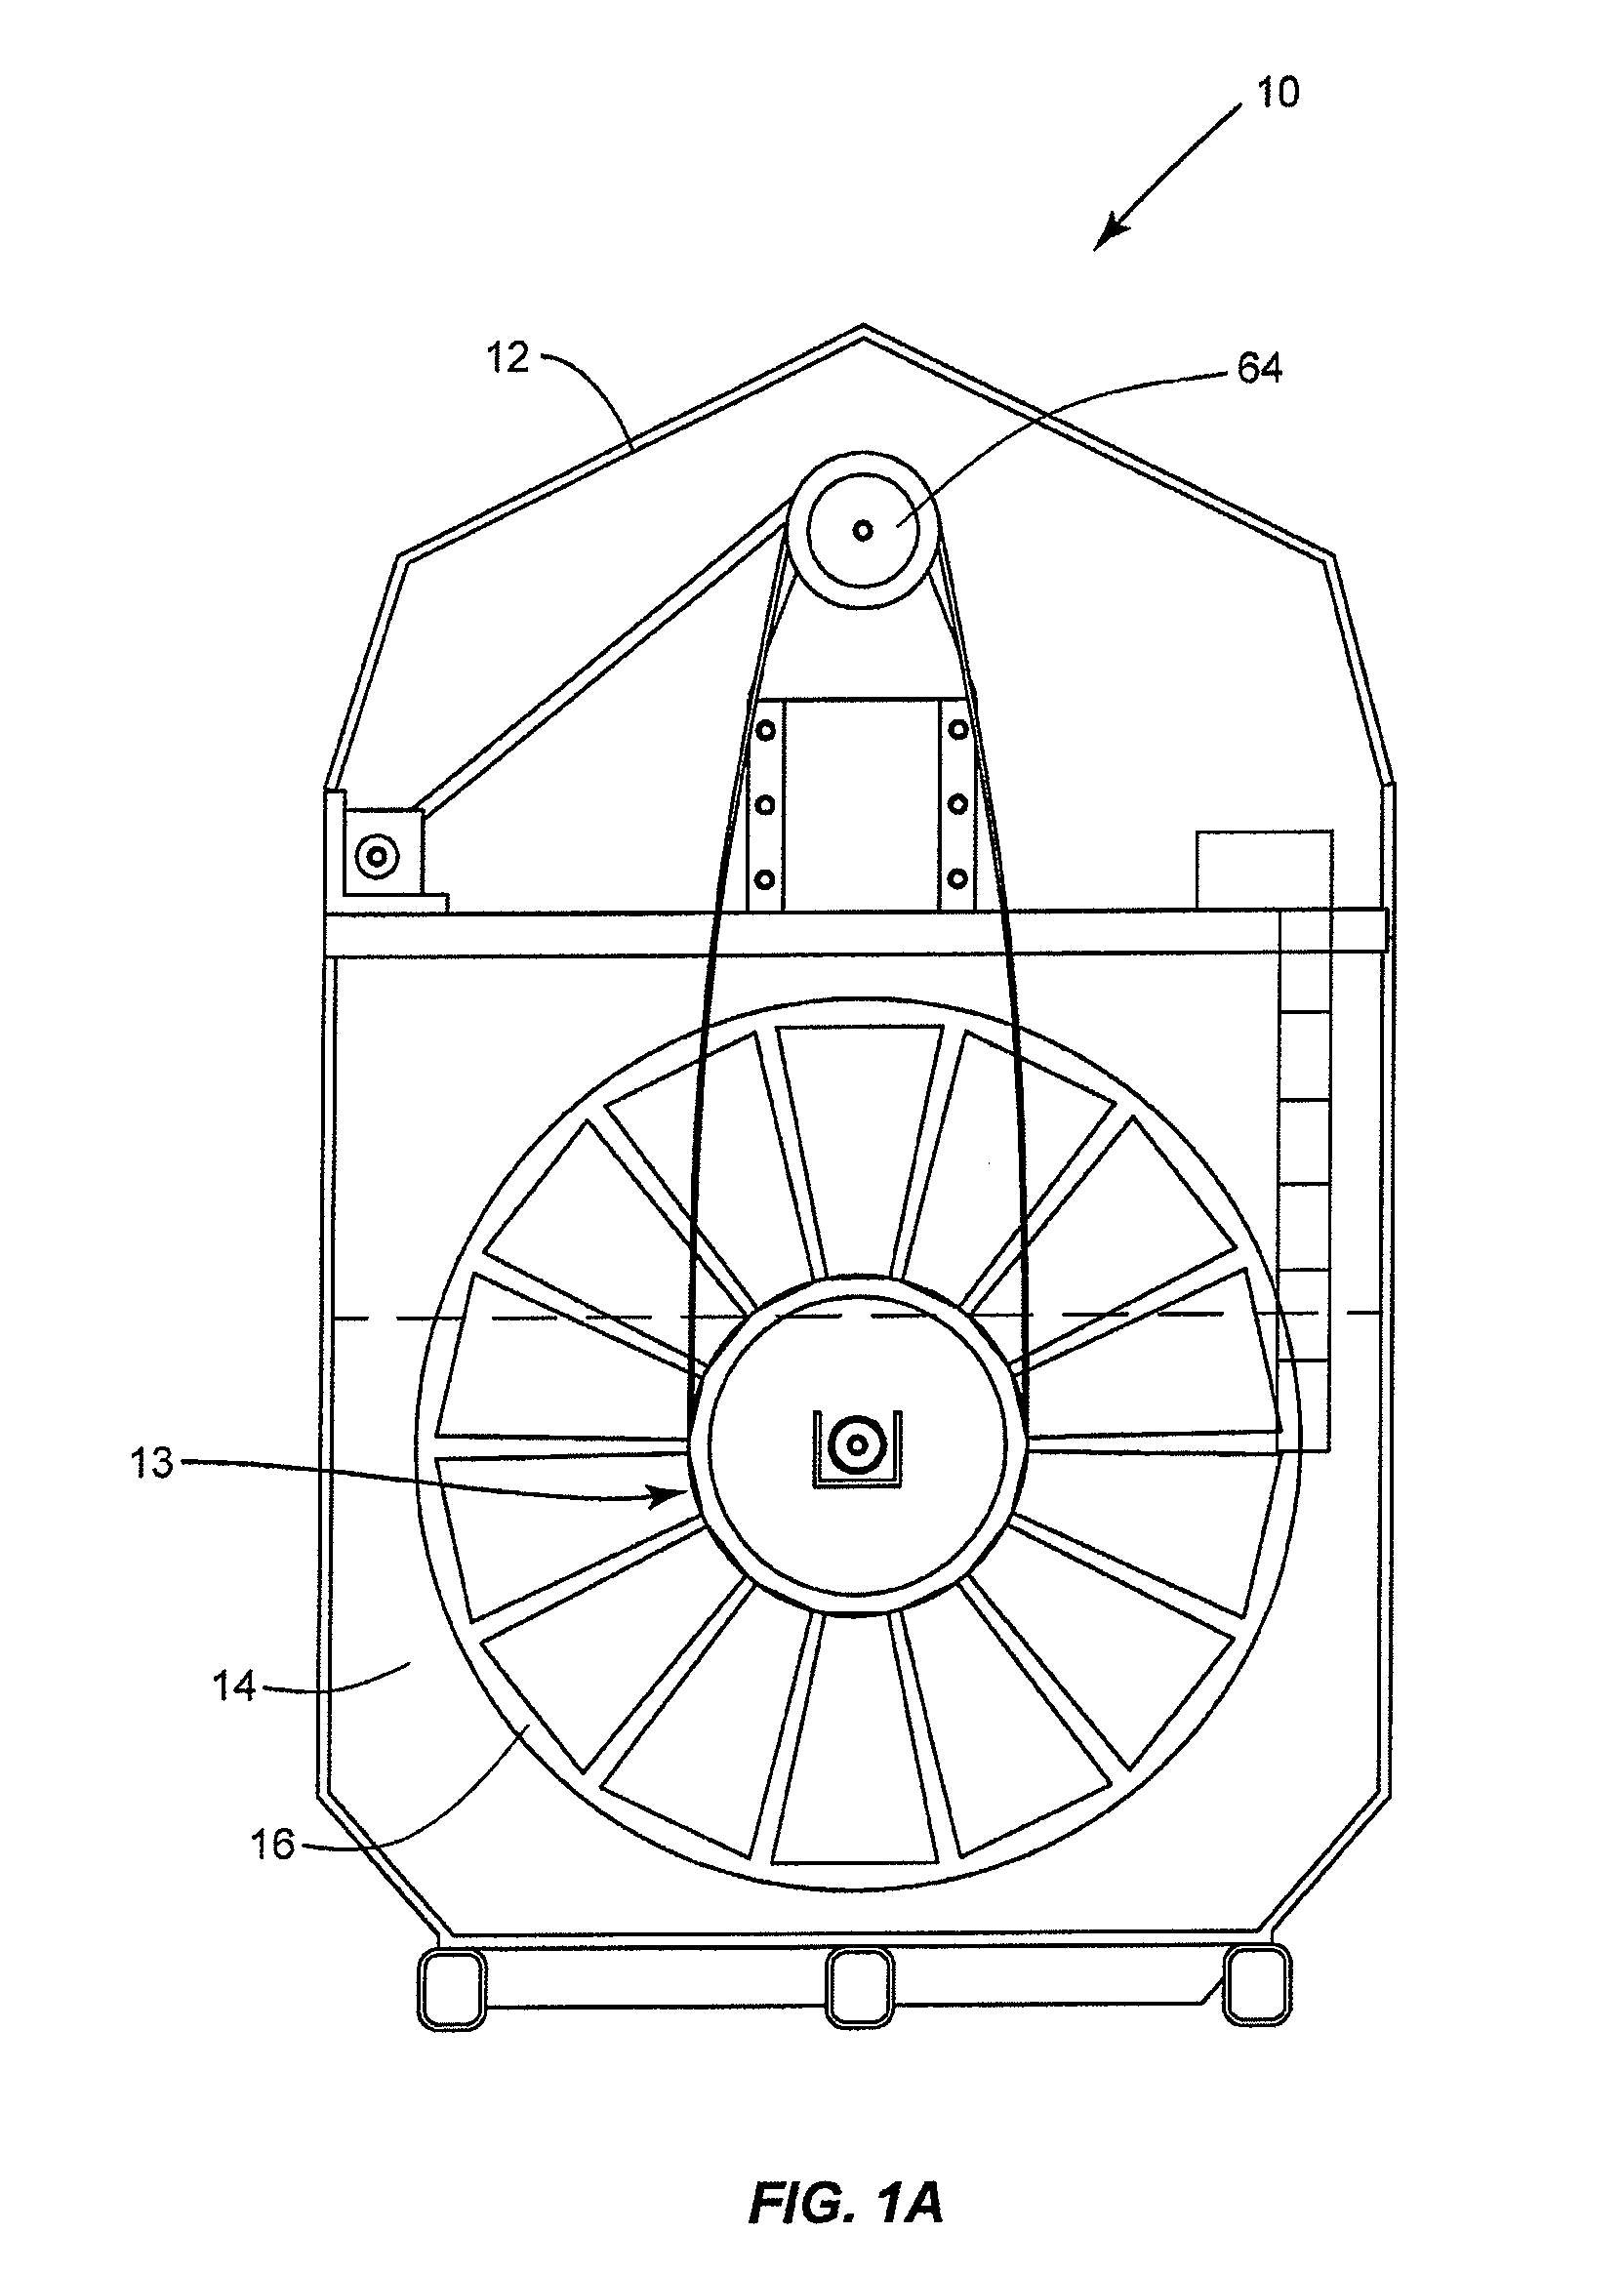 Rotary disc filter with automatic integrated backwash and chemical cleaning system